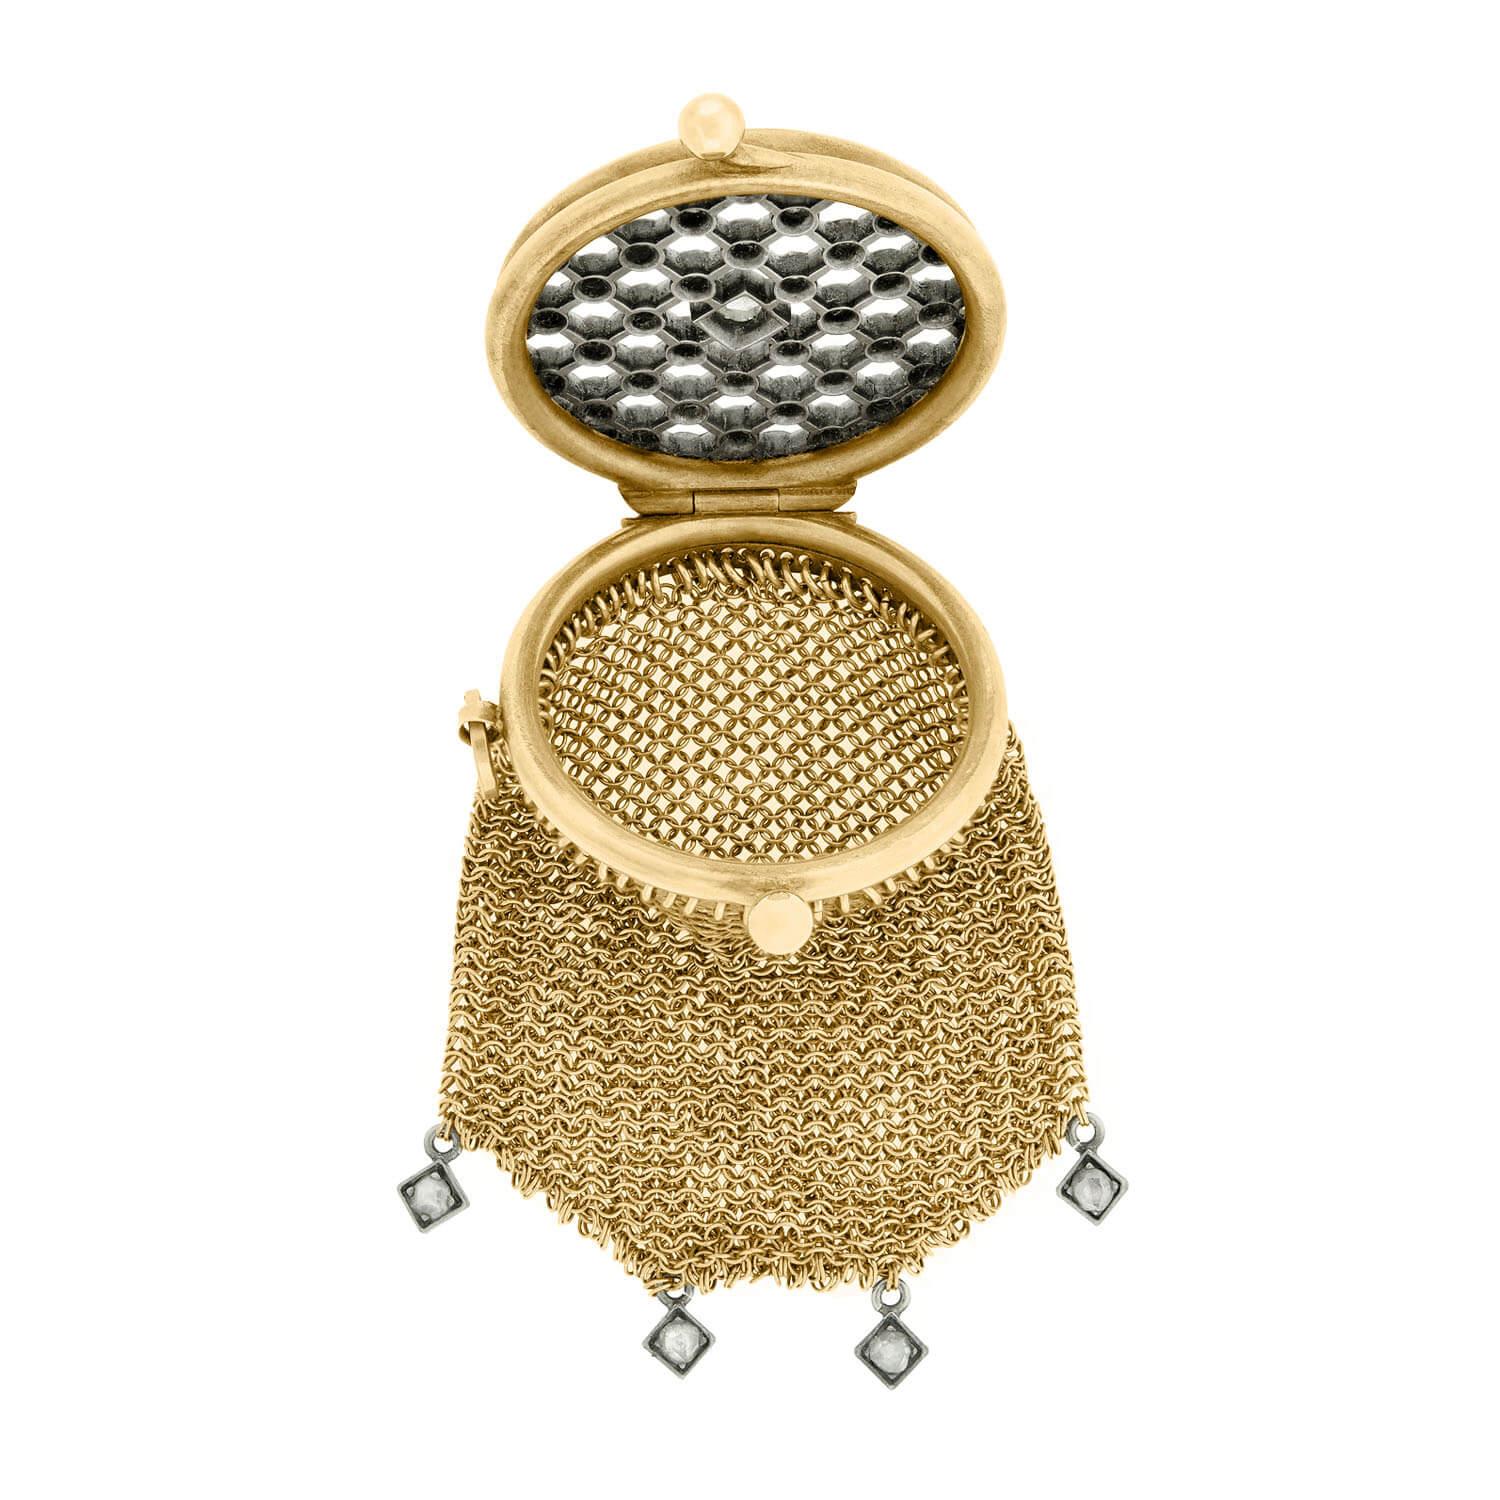 An absolutely gorgeous and unique chatelaine purse from the Victorian (ca1880) era! Crafted in solid 14kt yellow gold and sterling silver, this ornate coin purse features a beautiful frame that holds a hand wrought mesh bag. The circular gold frame